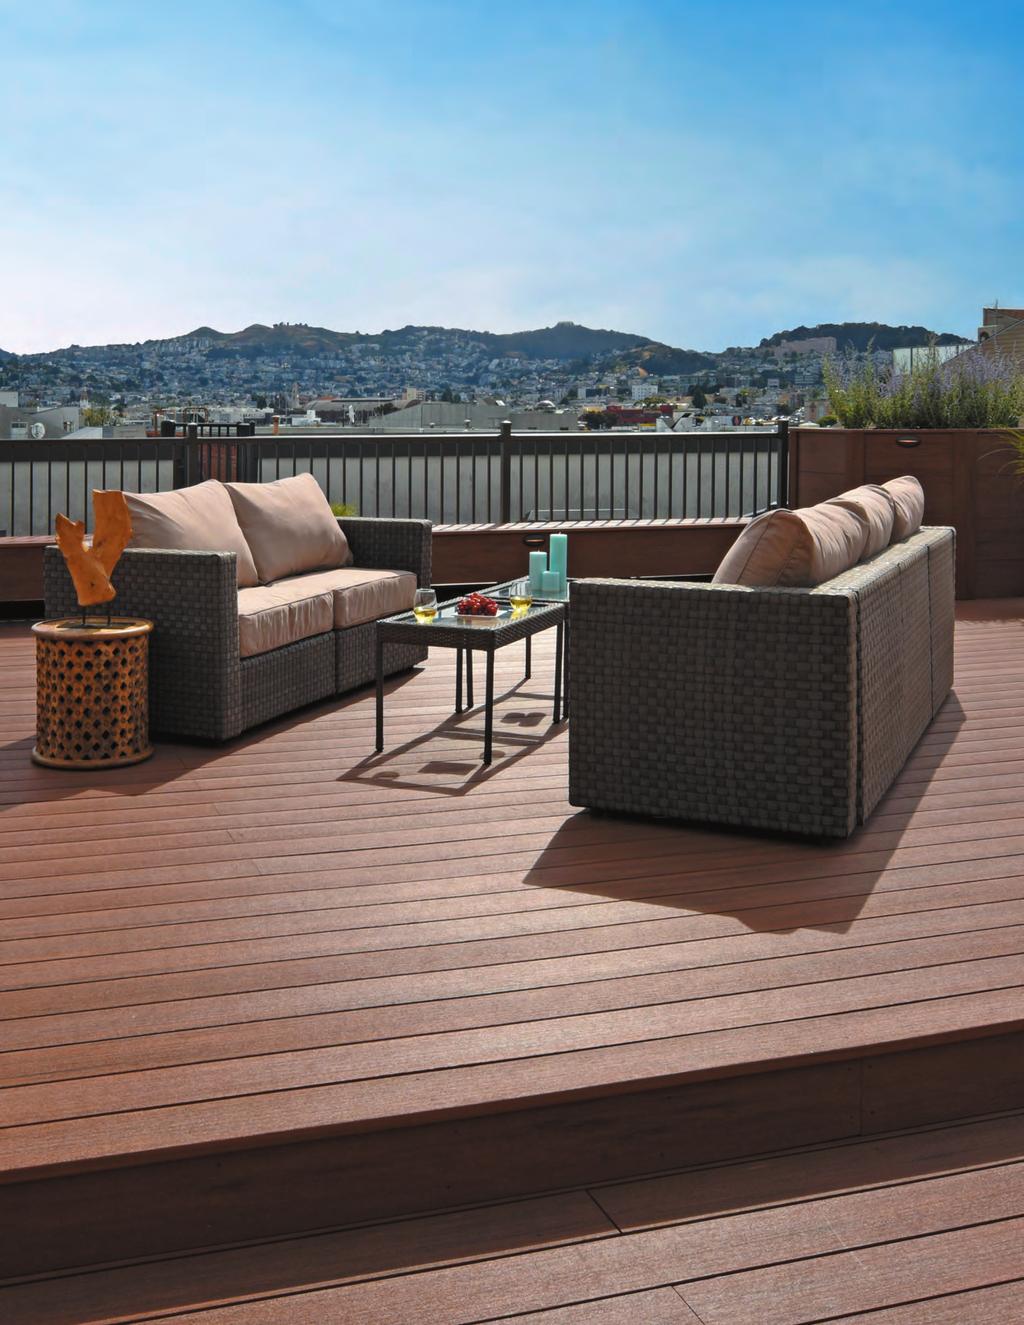 AZEK DECK TRANSFORMATIONS AFTER Rooftop revamp AZEK Deck was chosen as the perfect solution to